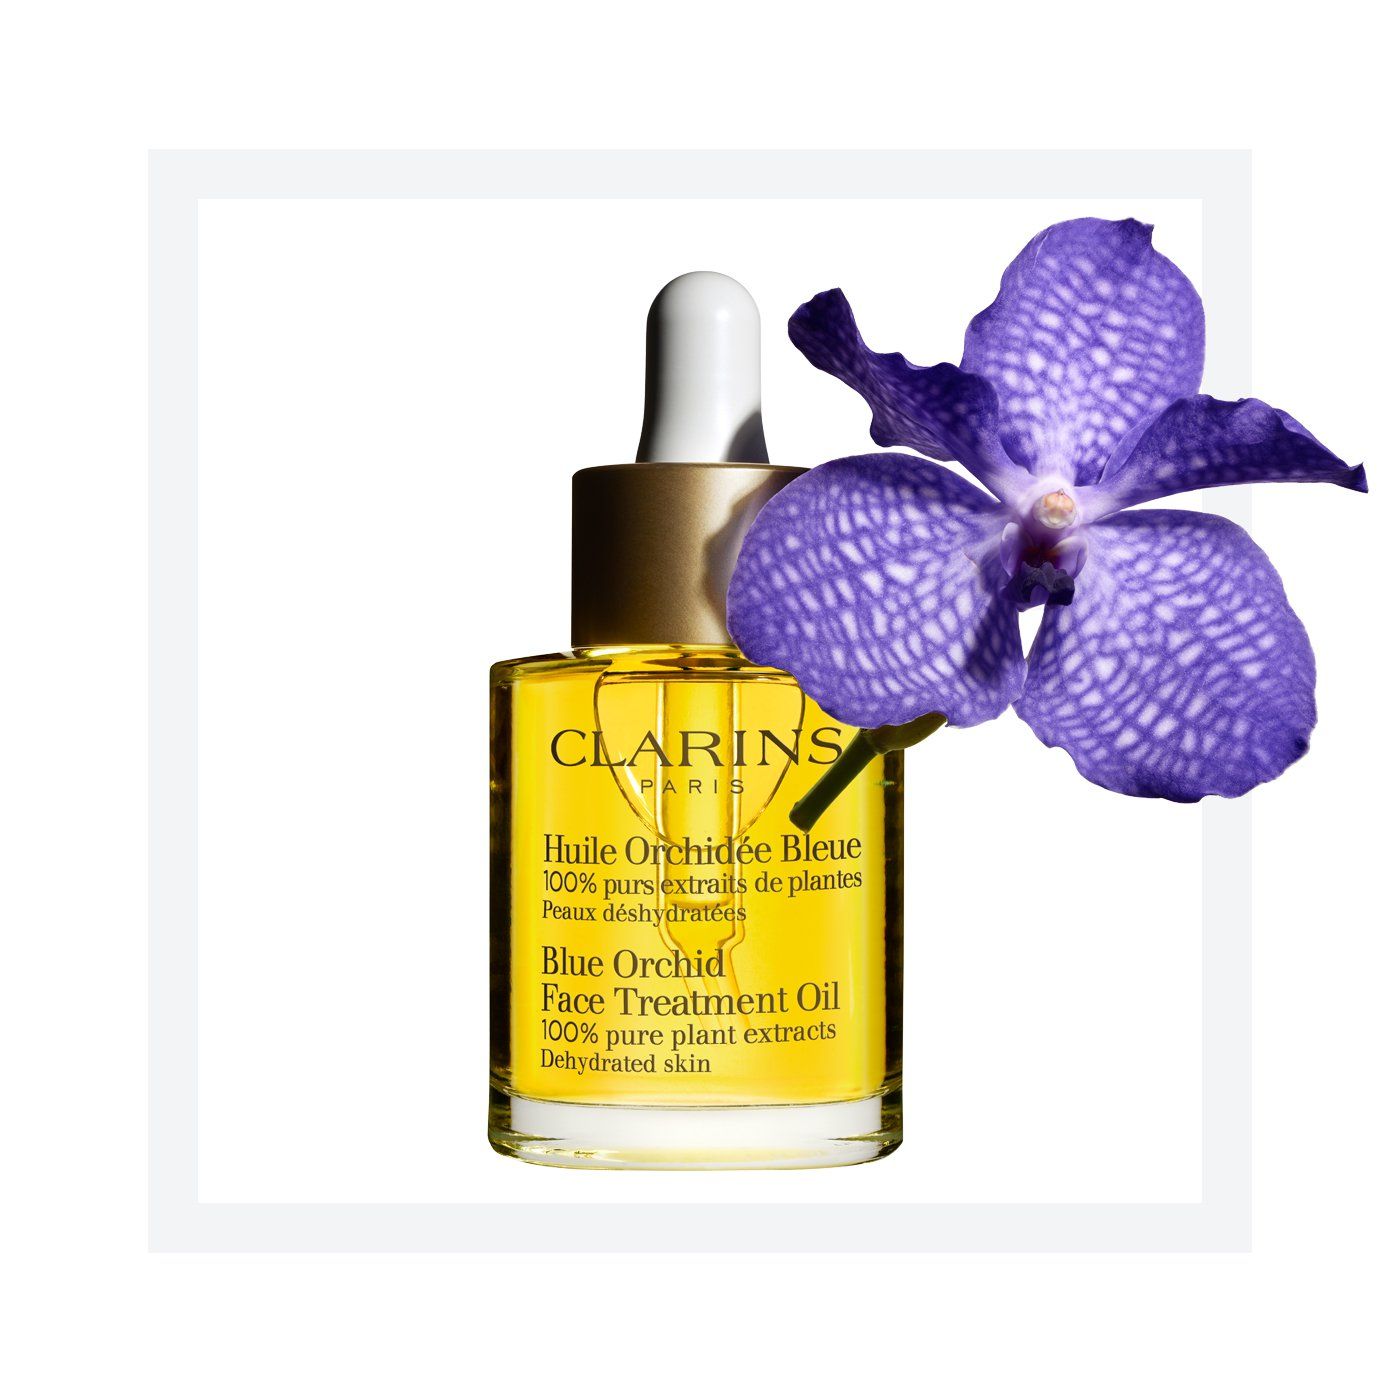 Every 21 seconds worldwide, one bottle of Clarins beauty oil is sold